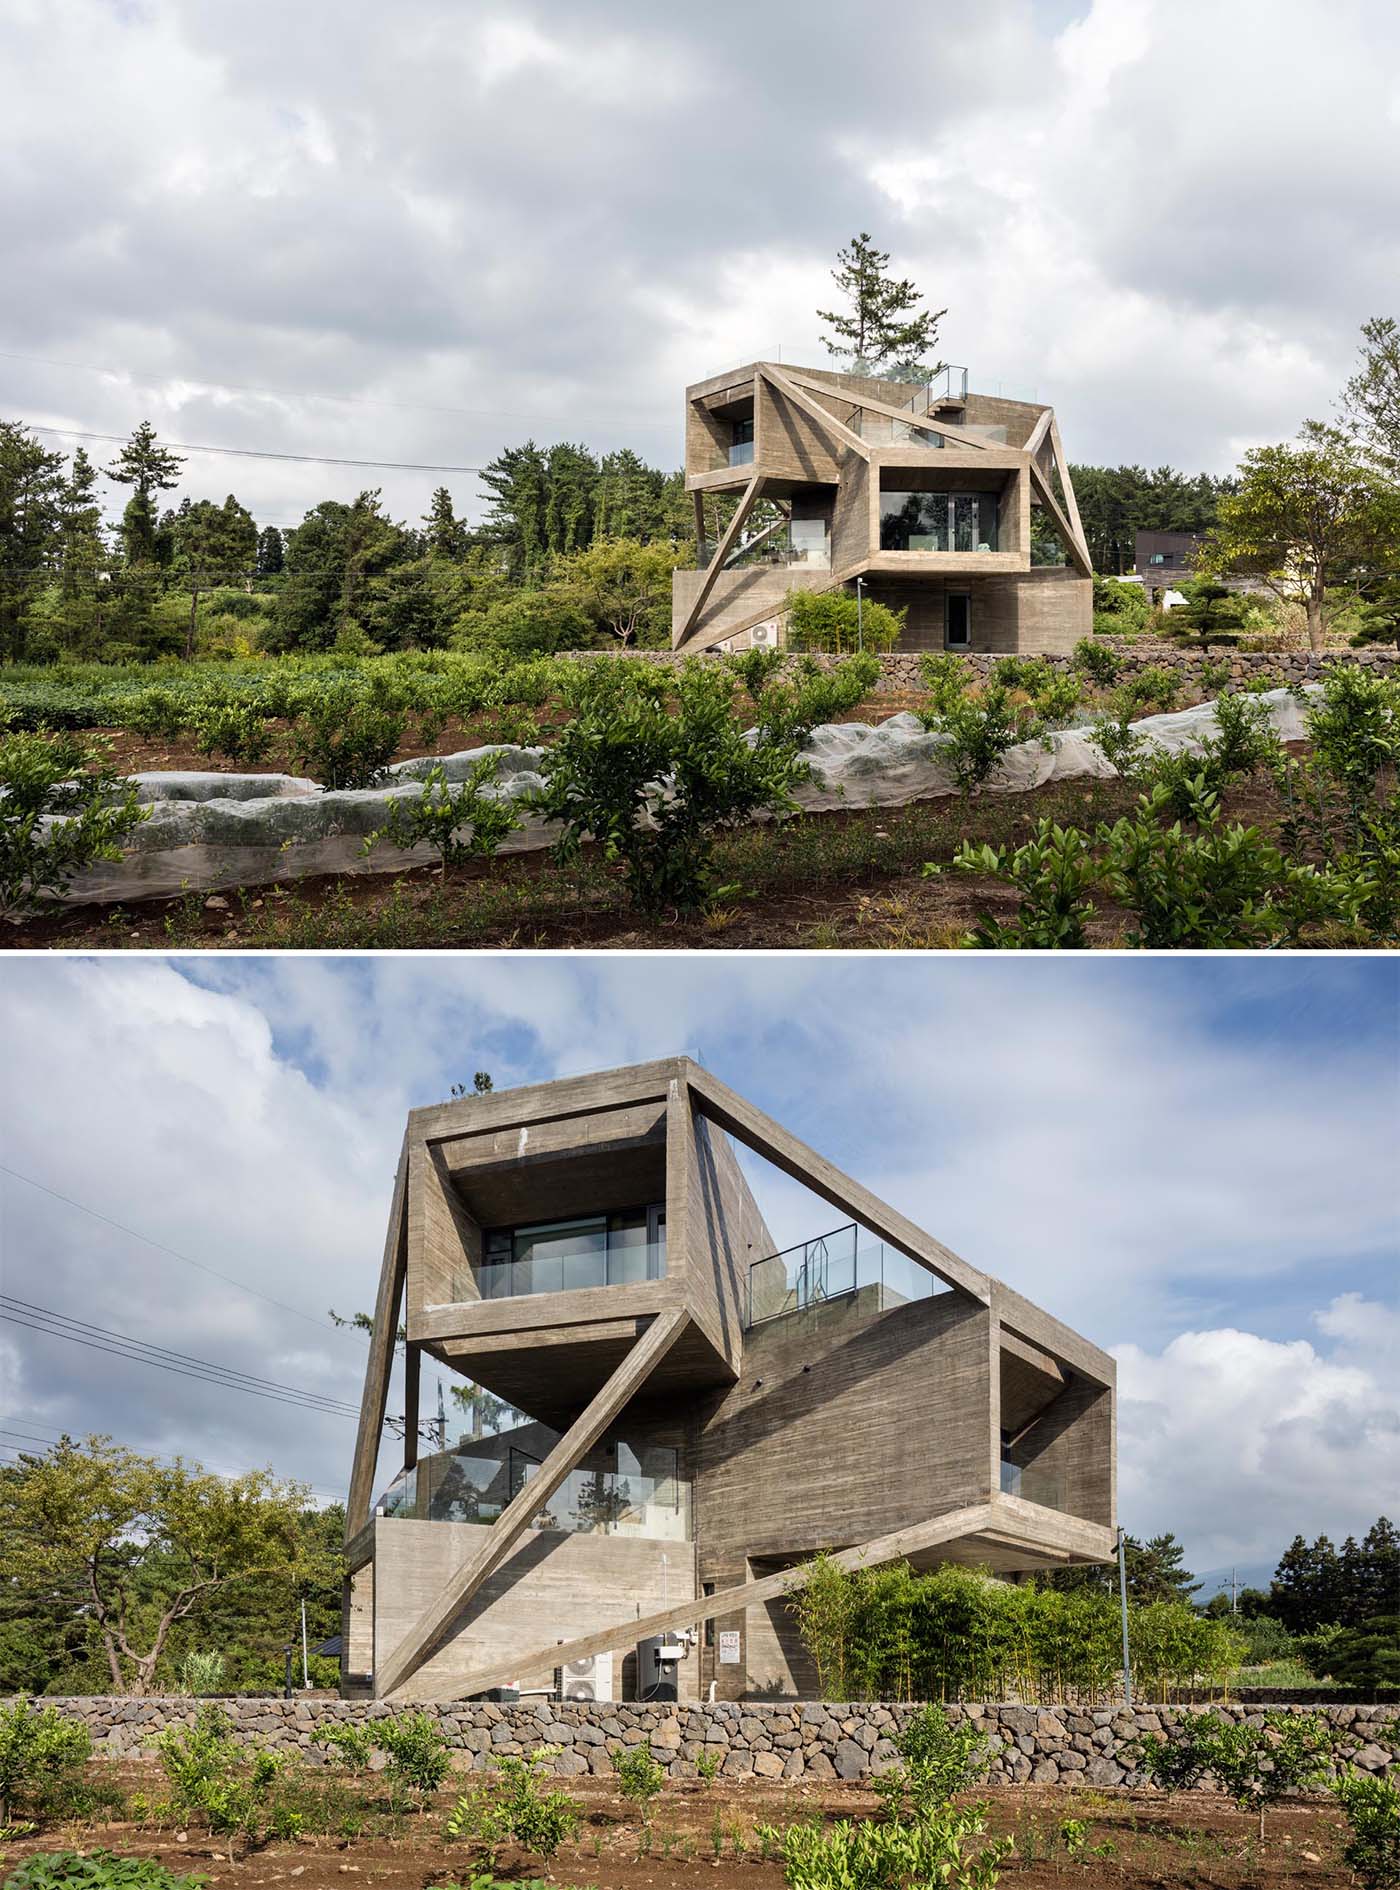 The exterior of this home is striking in its design, with bold geometric shapes made from concrete and angled elements that connect the rotated boxes. Glass balconies and stair railings seamlessly blend into the concrete design. 